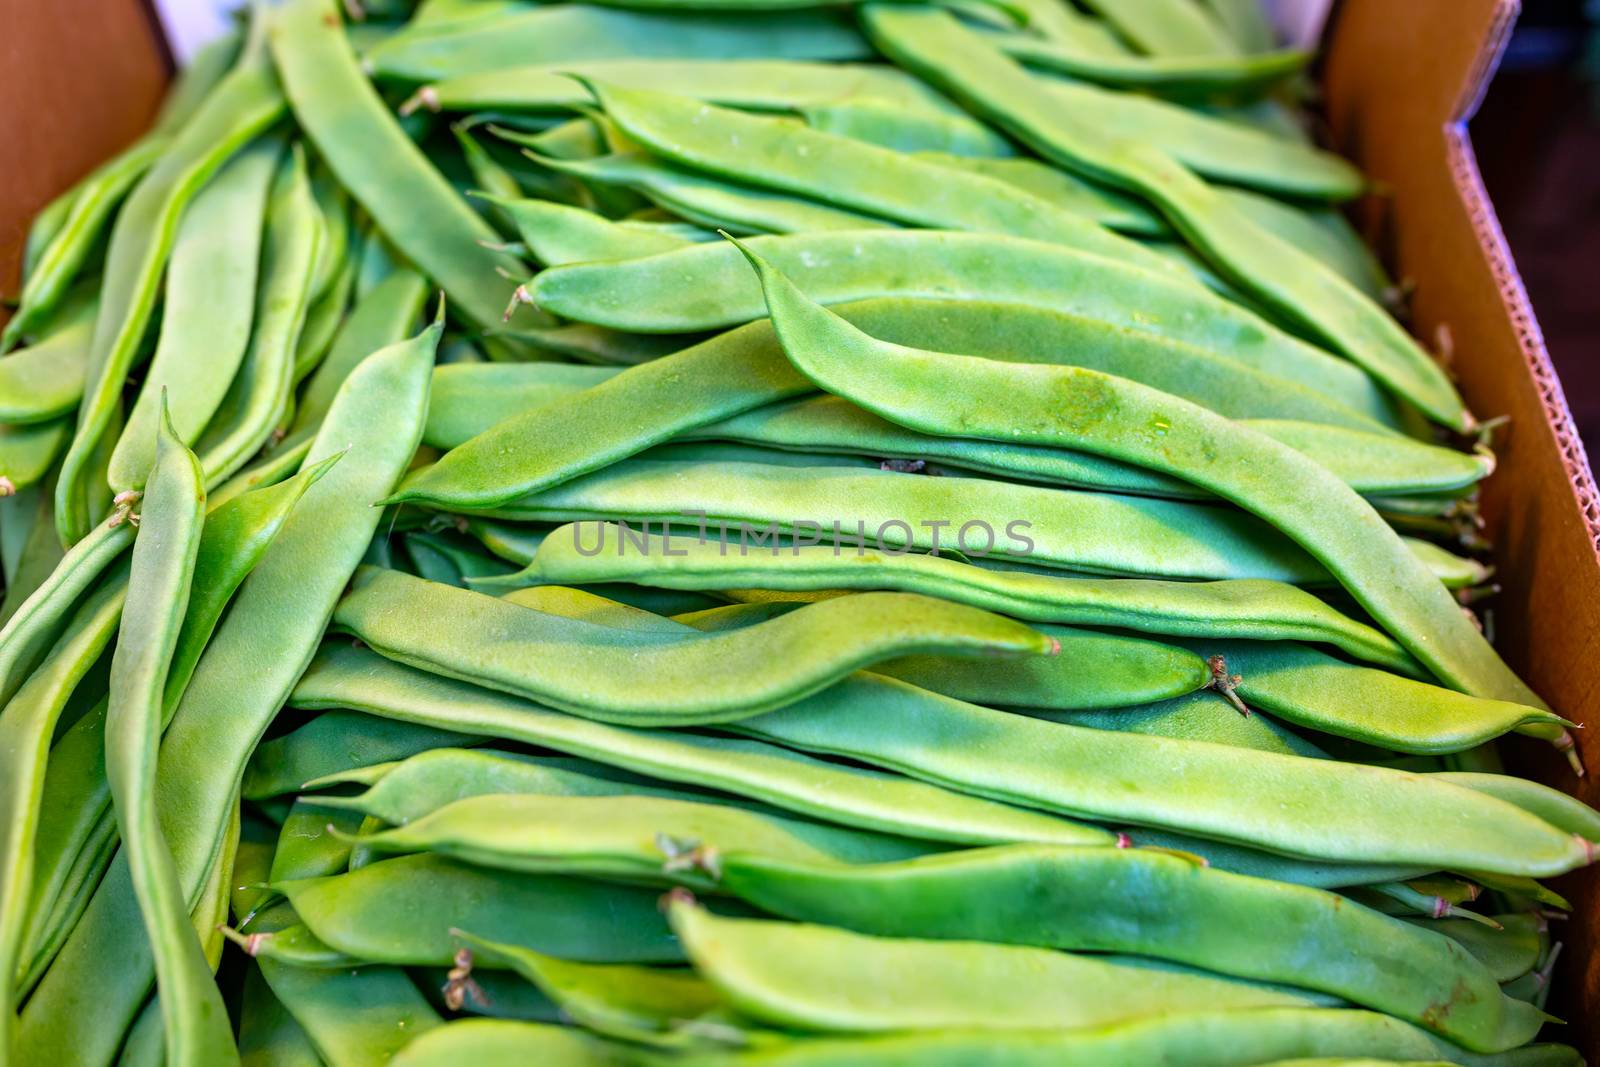 Young bean pods. Green background of vegetables close-up. Box bazaar. Whole raw green beans packed in a punnet for sale